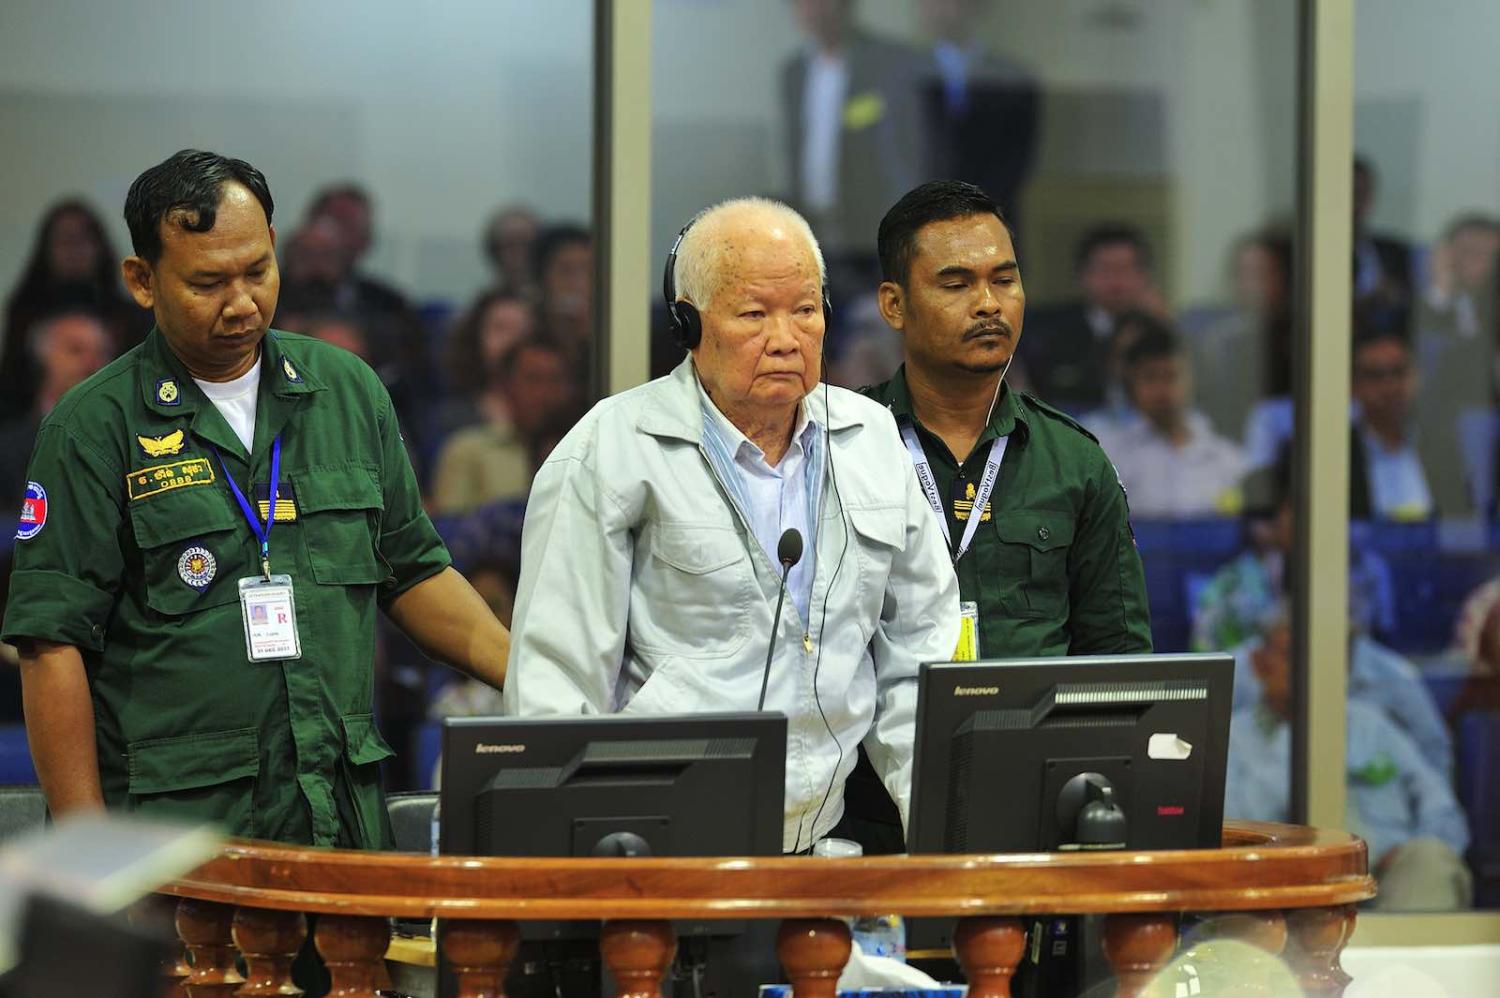 Pronouncement of the Judgement in Case 002/02 for Khieu Samphan on 16 November 2018, Extraordinary Chambers in the Courts of Cambodia (ECCC/Flickr)